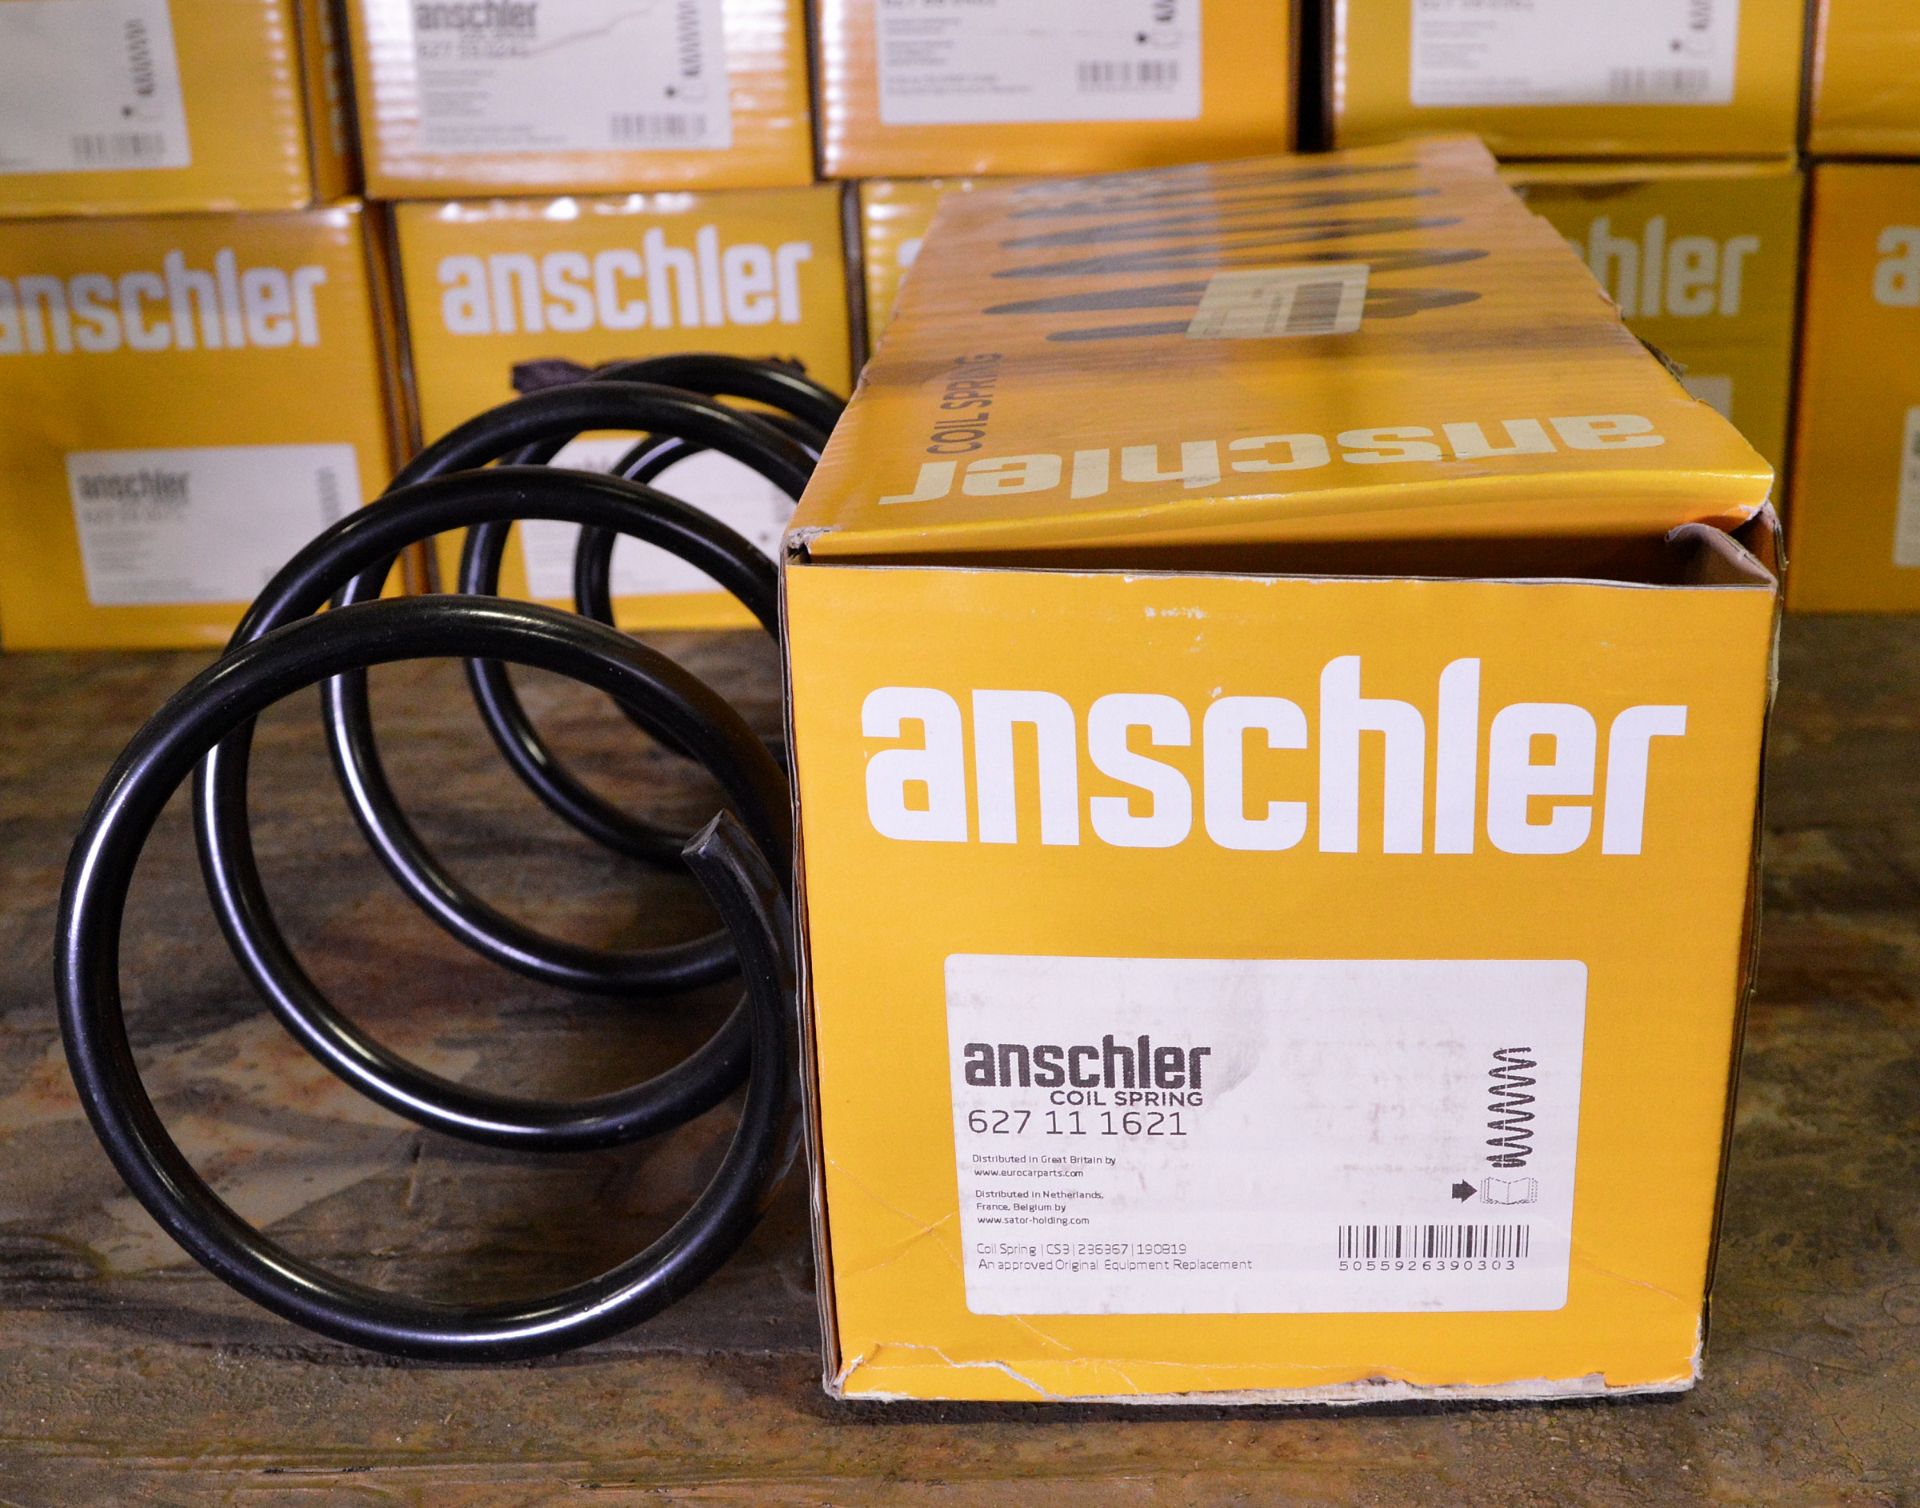 Vehicle parts - Anschler coil springs - see pictures for models and types - Image 4 of 4